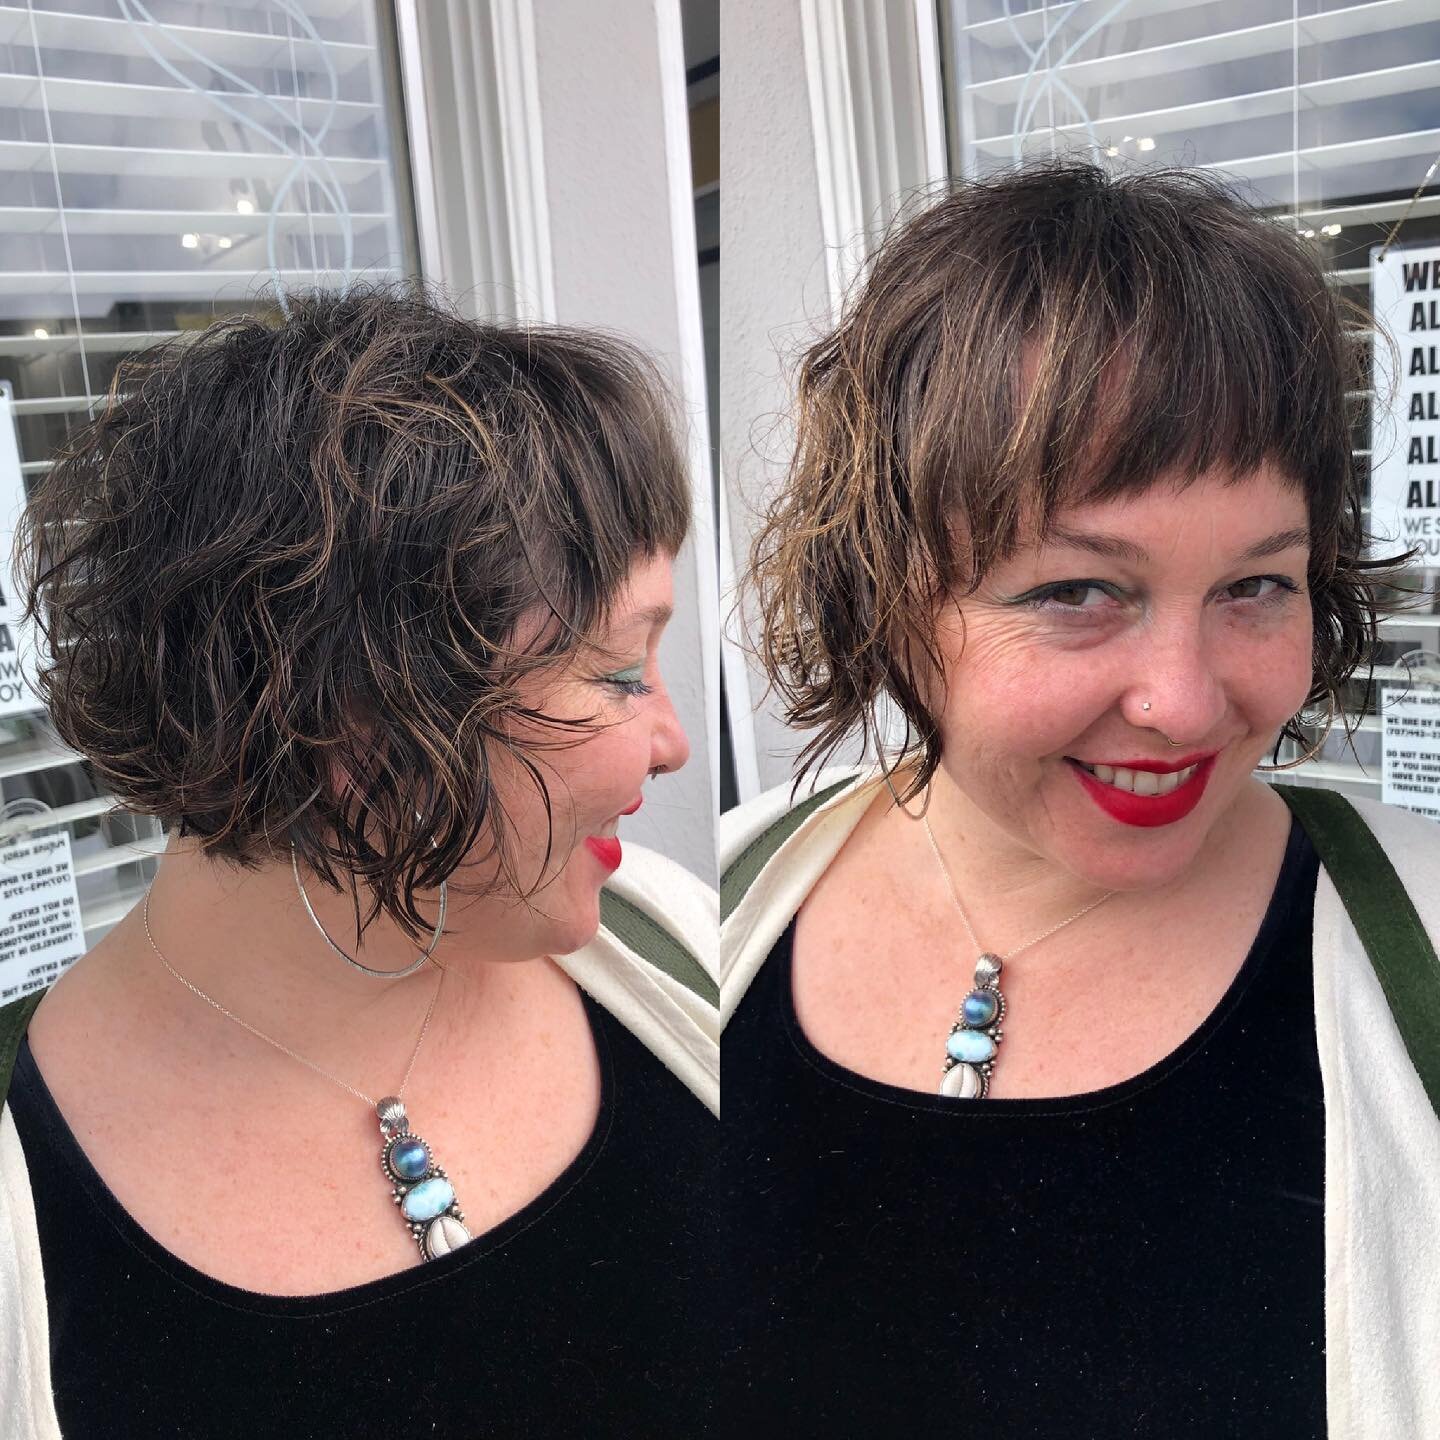 Feeling free and flirty after this one.
Styled with @cultandking Set Spray and Balm. 

Cut by @hairbysus 
#eurekastylist #tumbleweedhairparlour #frenchbob #curlyhair #razorbangs